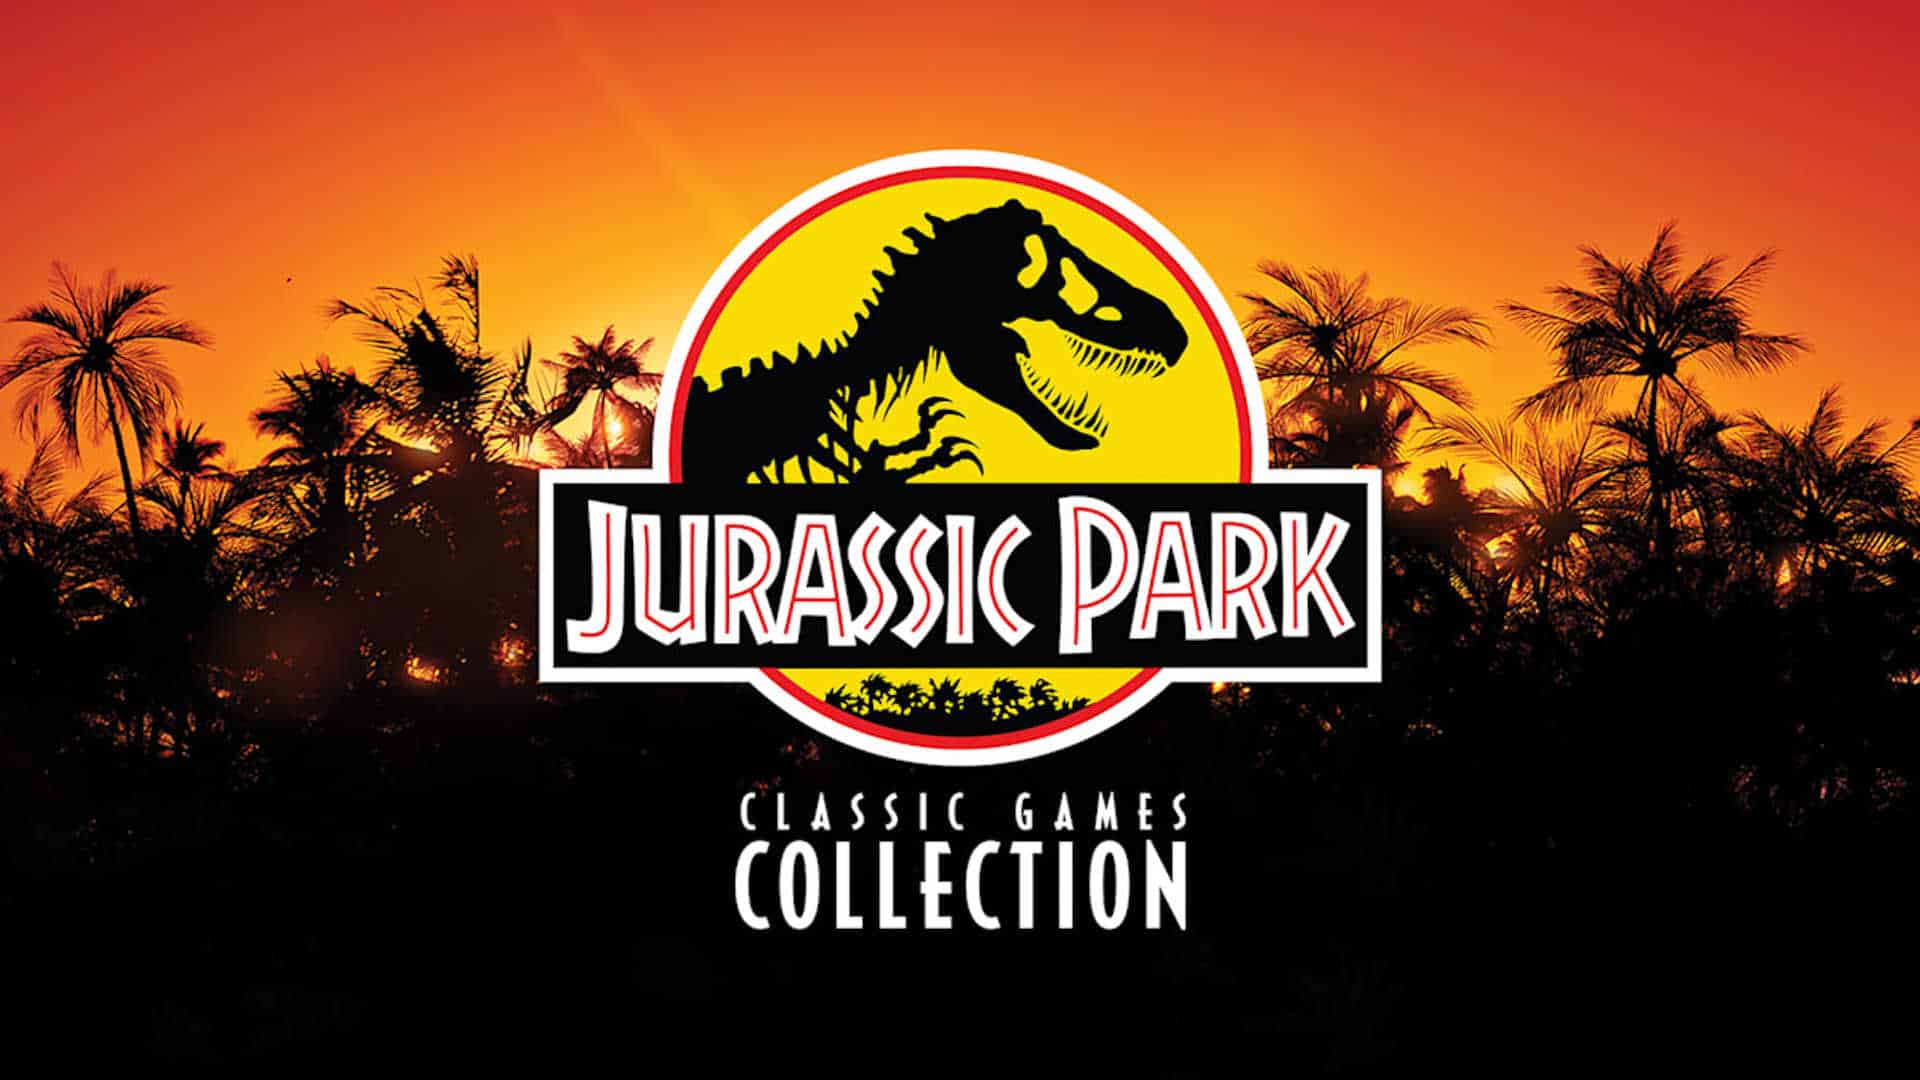 Jurassic Park Classic Games Collection release